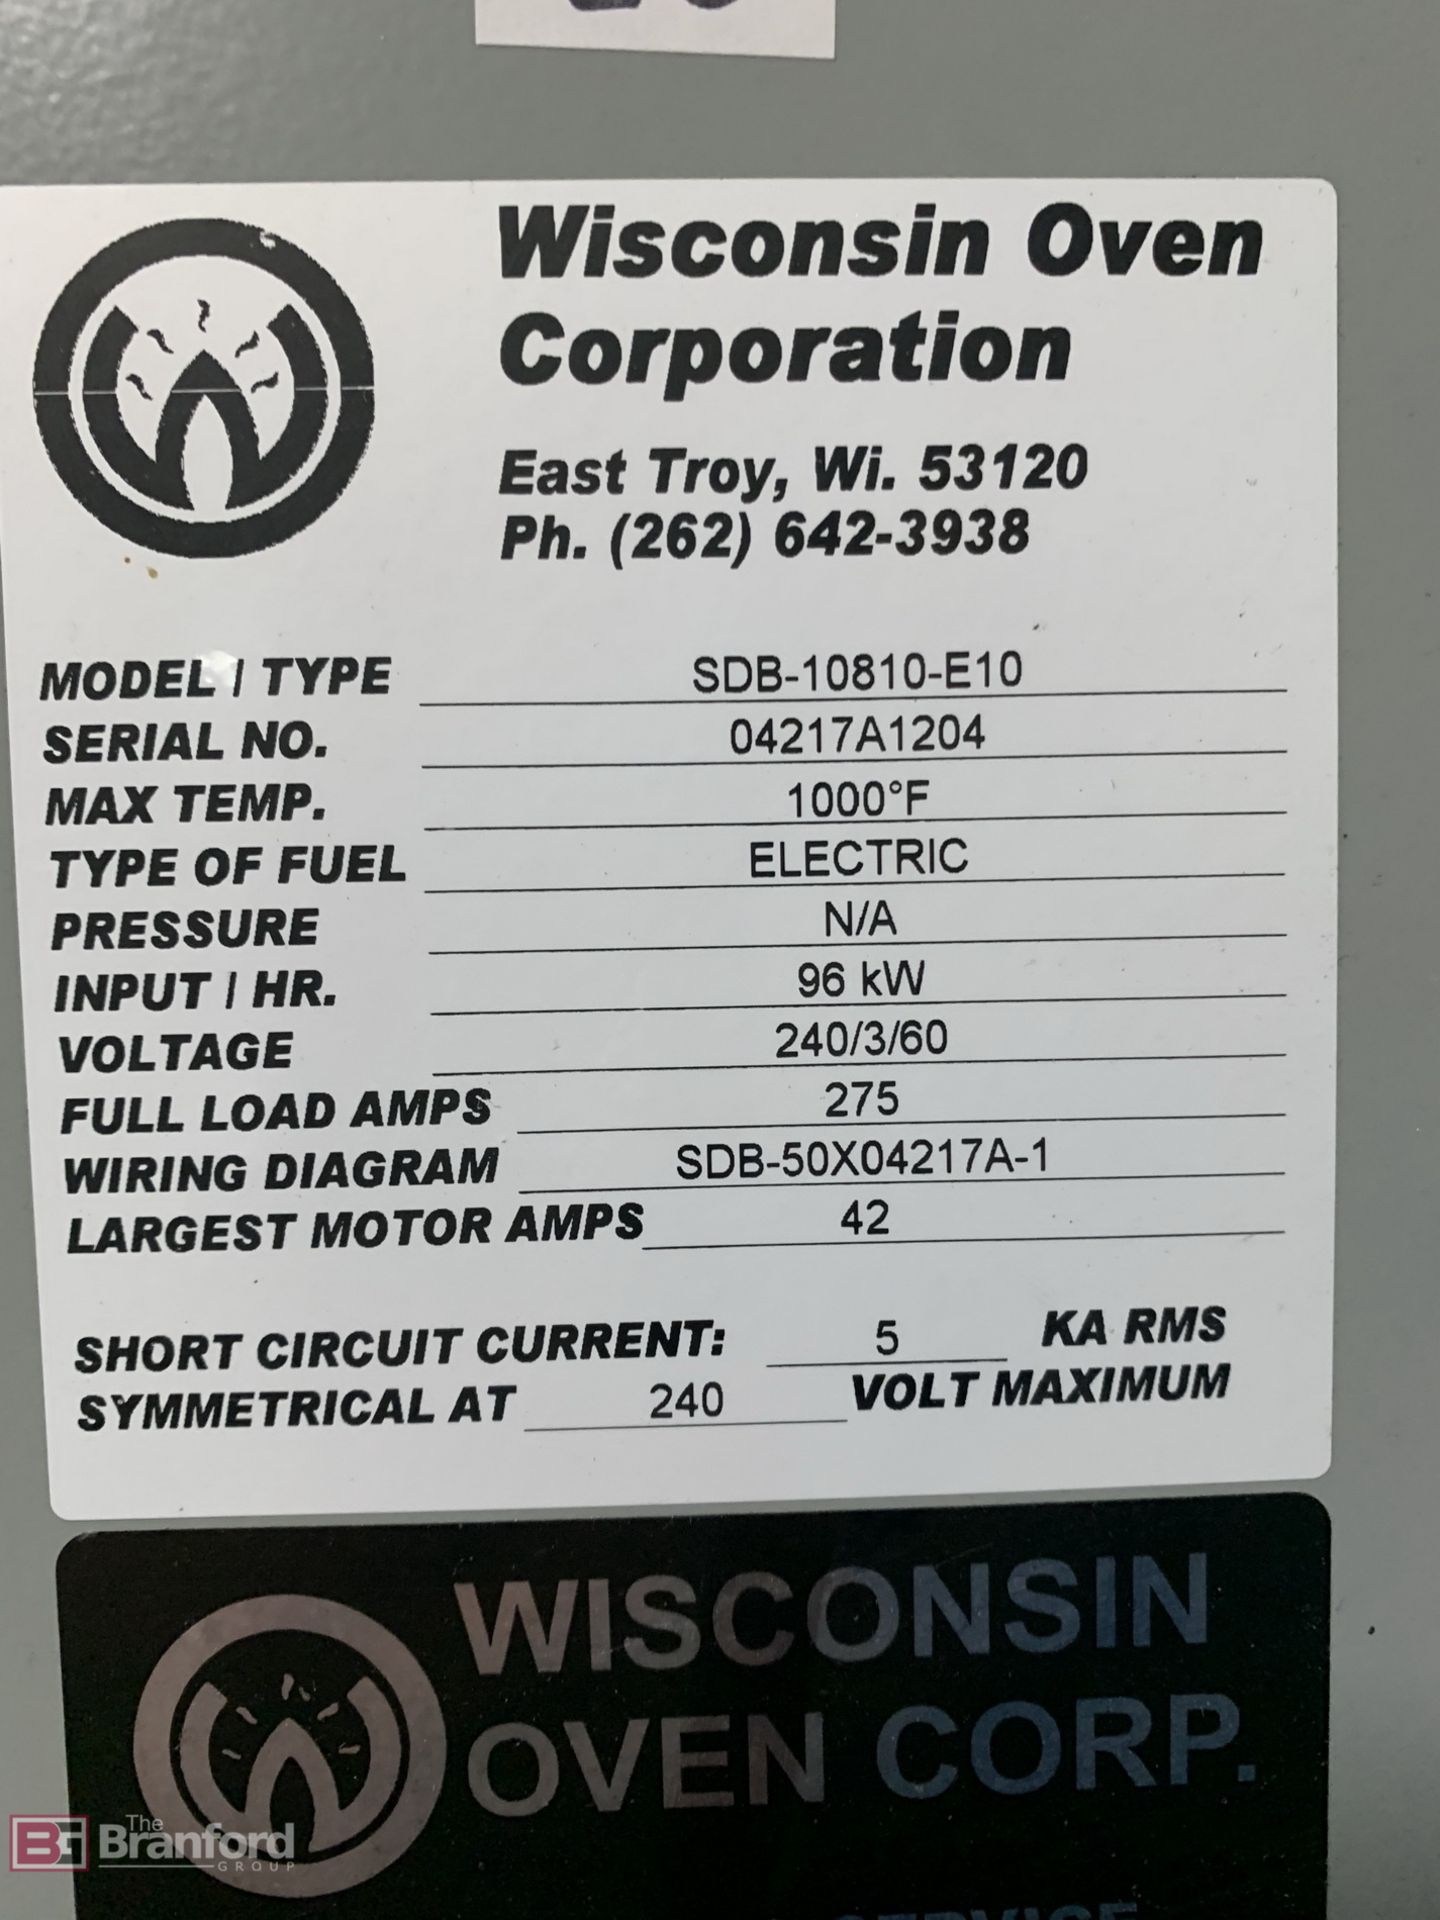 2012 Wisconsin Oven Corp Draw Batch Series Oven - Image 6 of 9